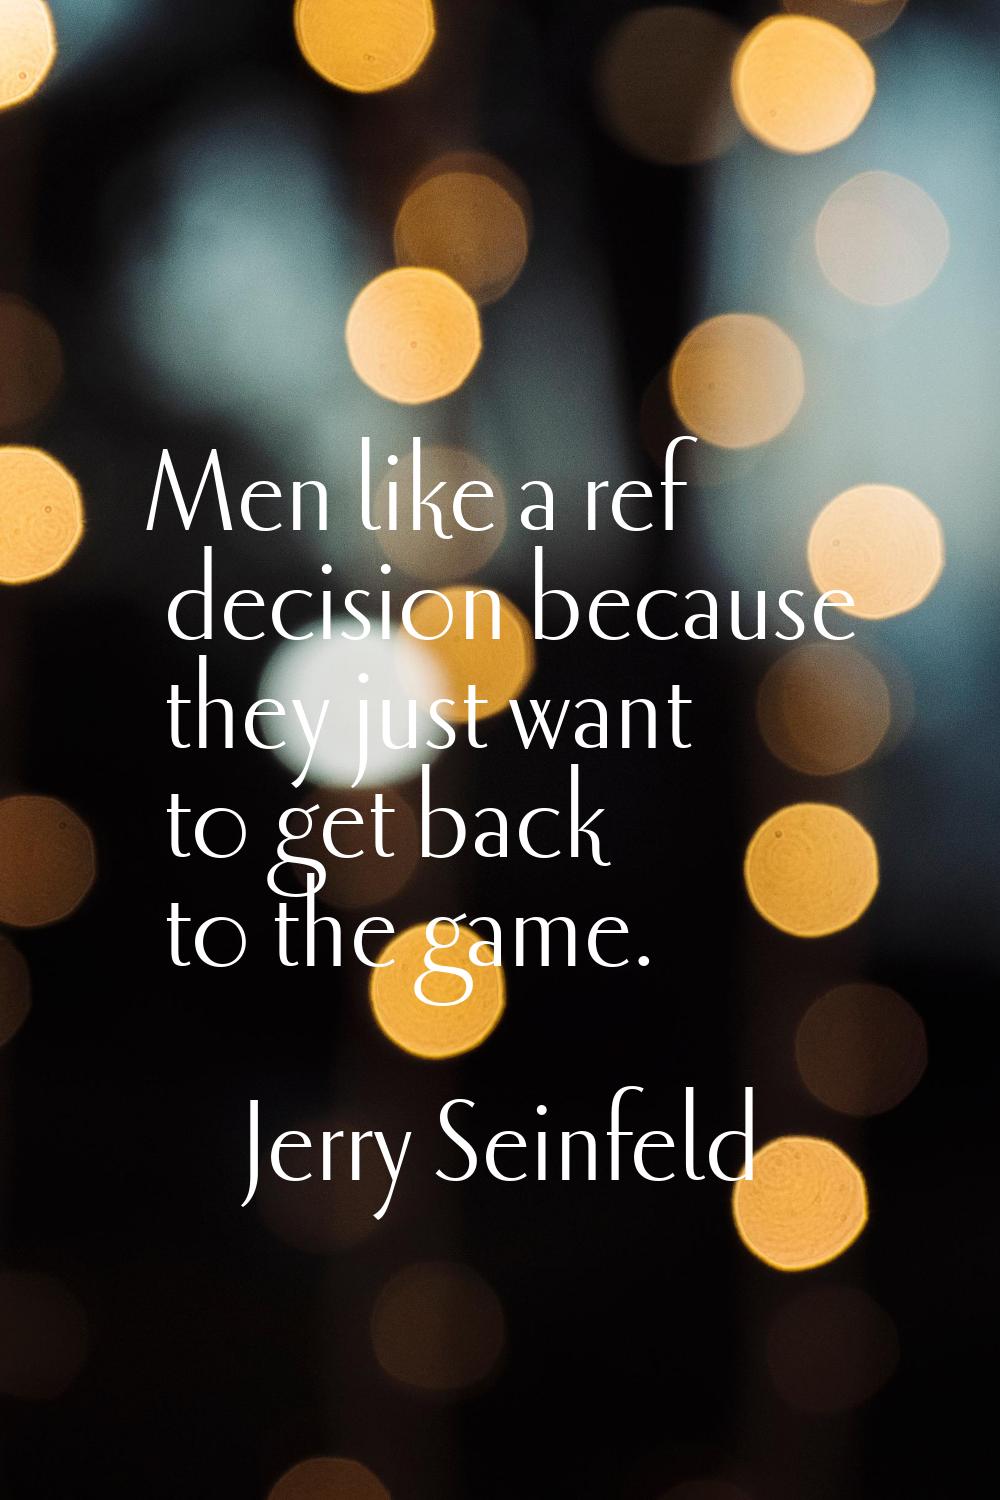 Men like a ref decision because they just want to get back to the game.